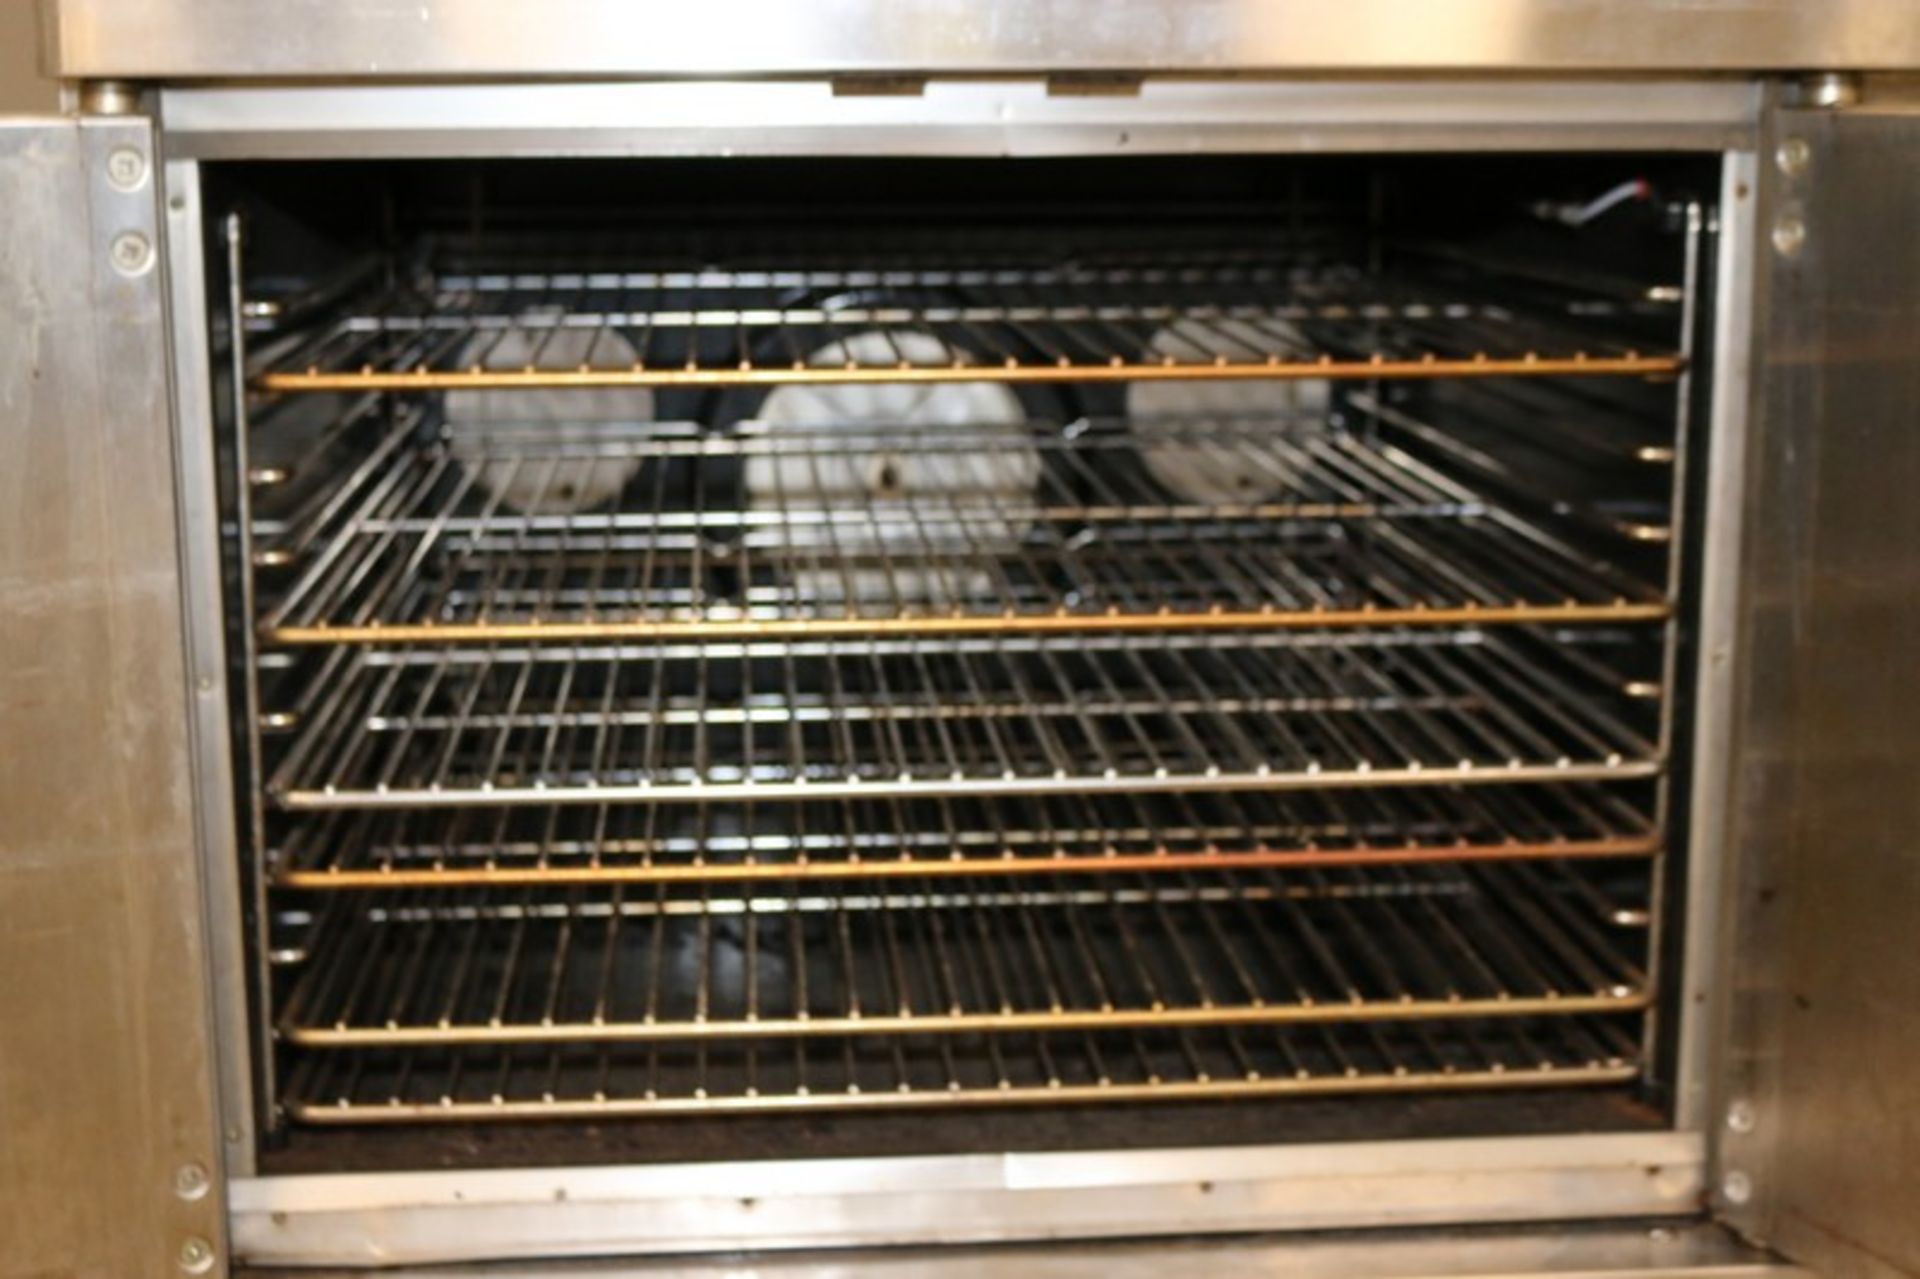 Blodgett/Zephaire S/S Double Door Oven, with (6) Internal Racks, Overall Dims.: Aprox. 43" L x 38" W - Image 5 of 5